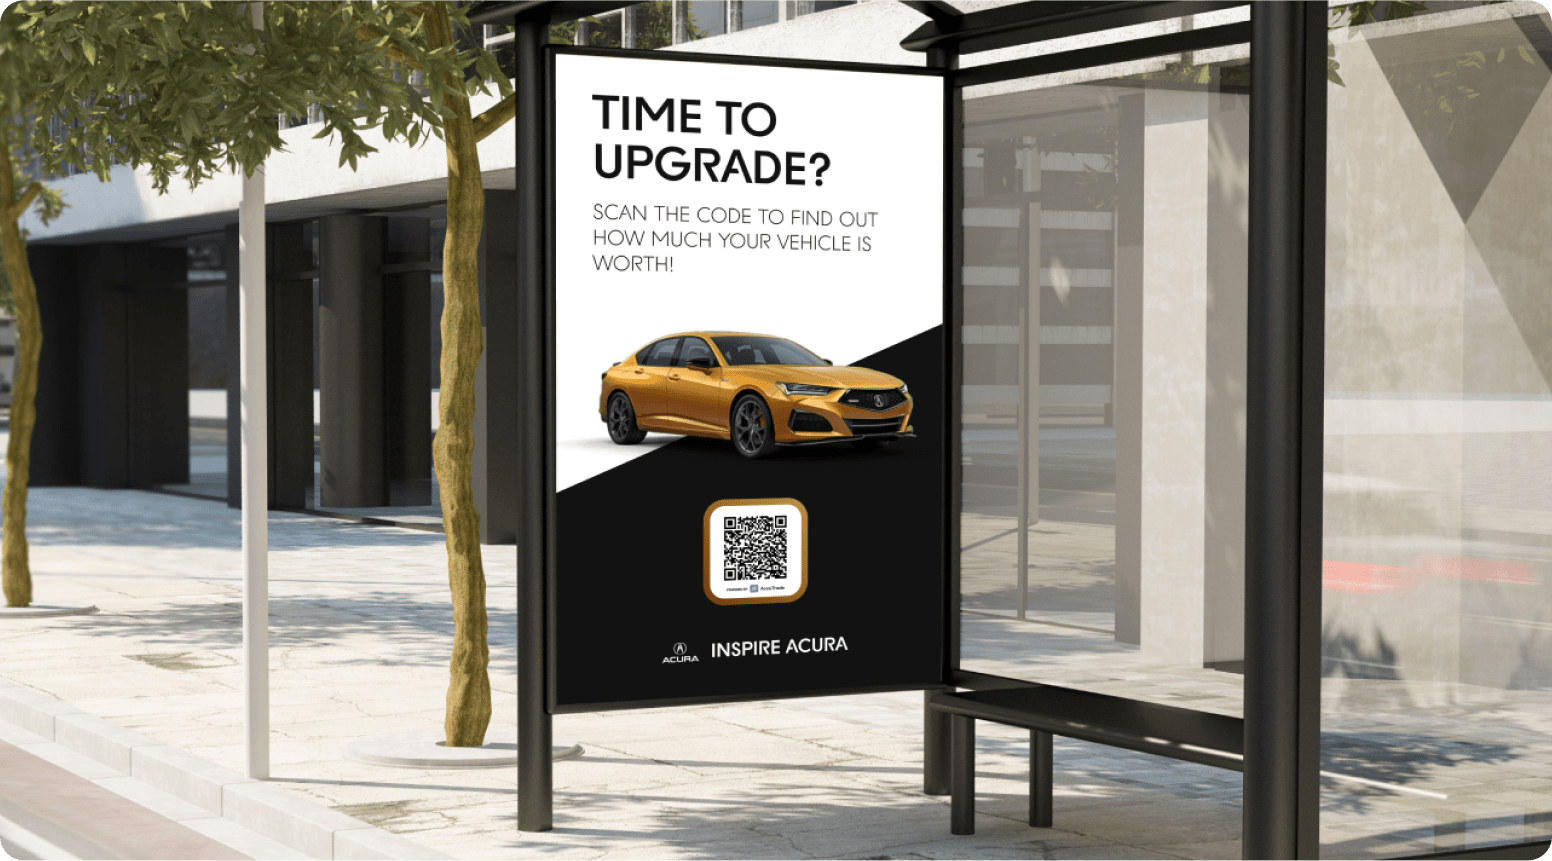 Bus stop on the street showing back lit vehicle ad with headline 'Time to Upgrade?' containing QR code.